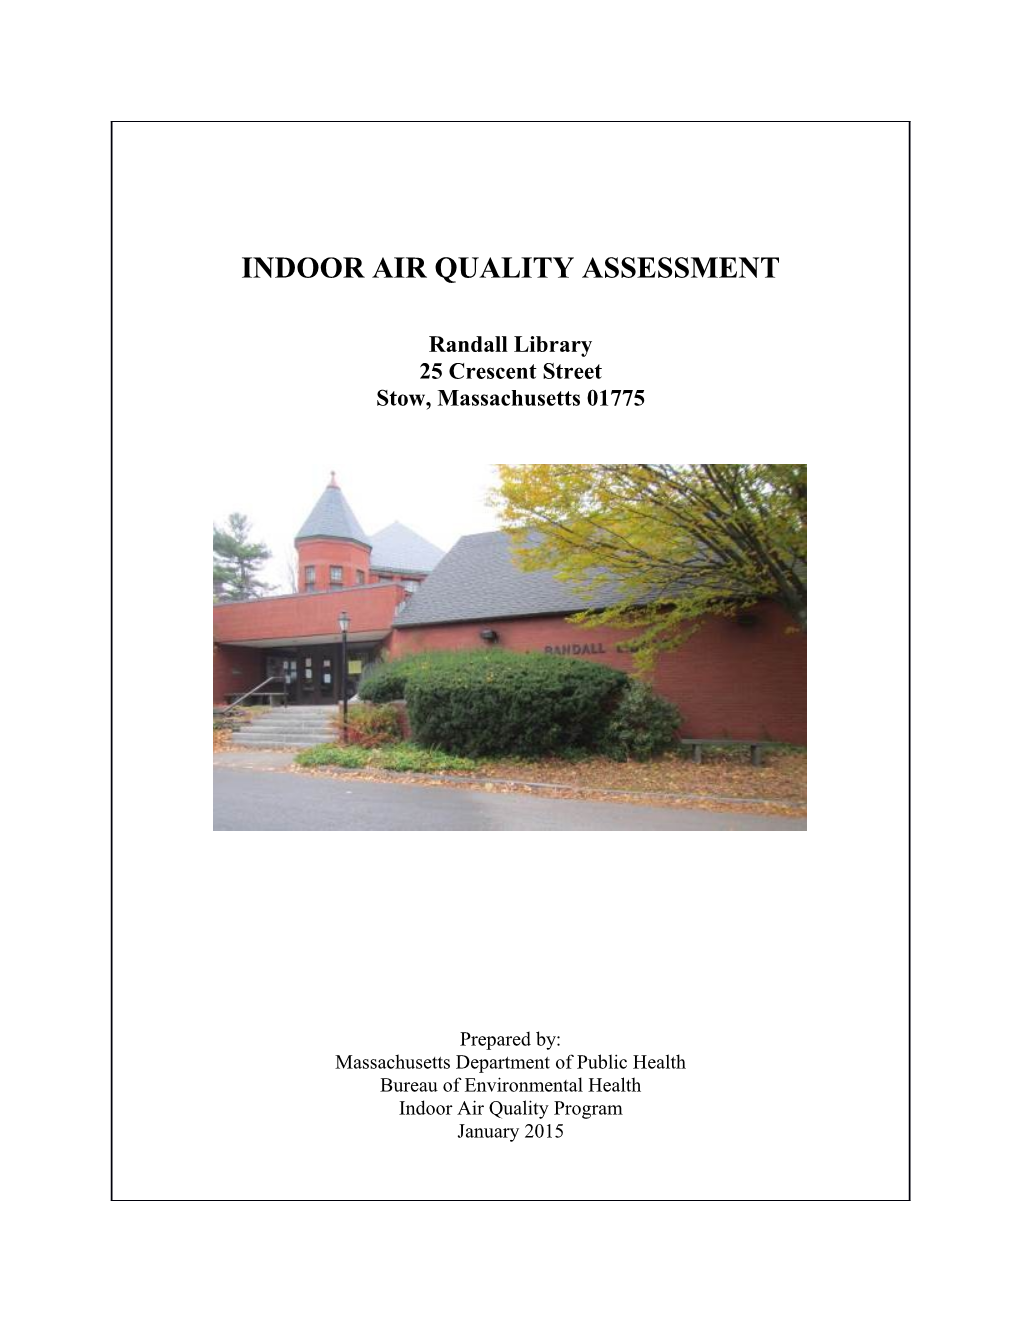 Indoor Air Quality Assessment - Randall Library, Stow, Massachusetts